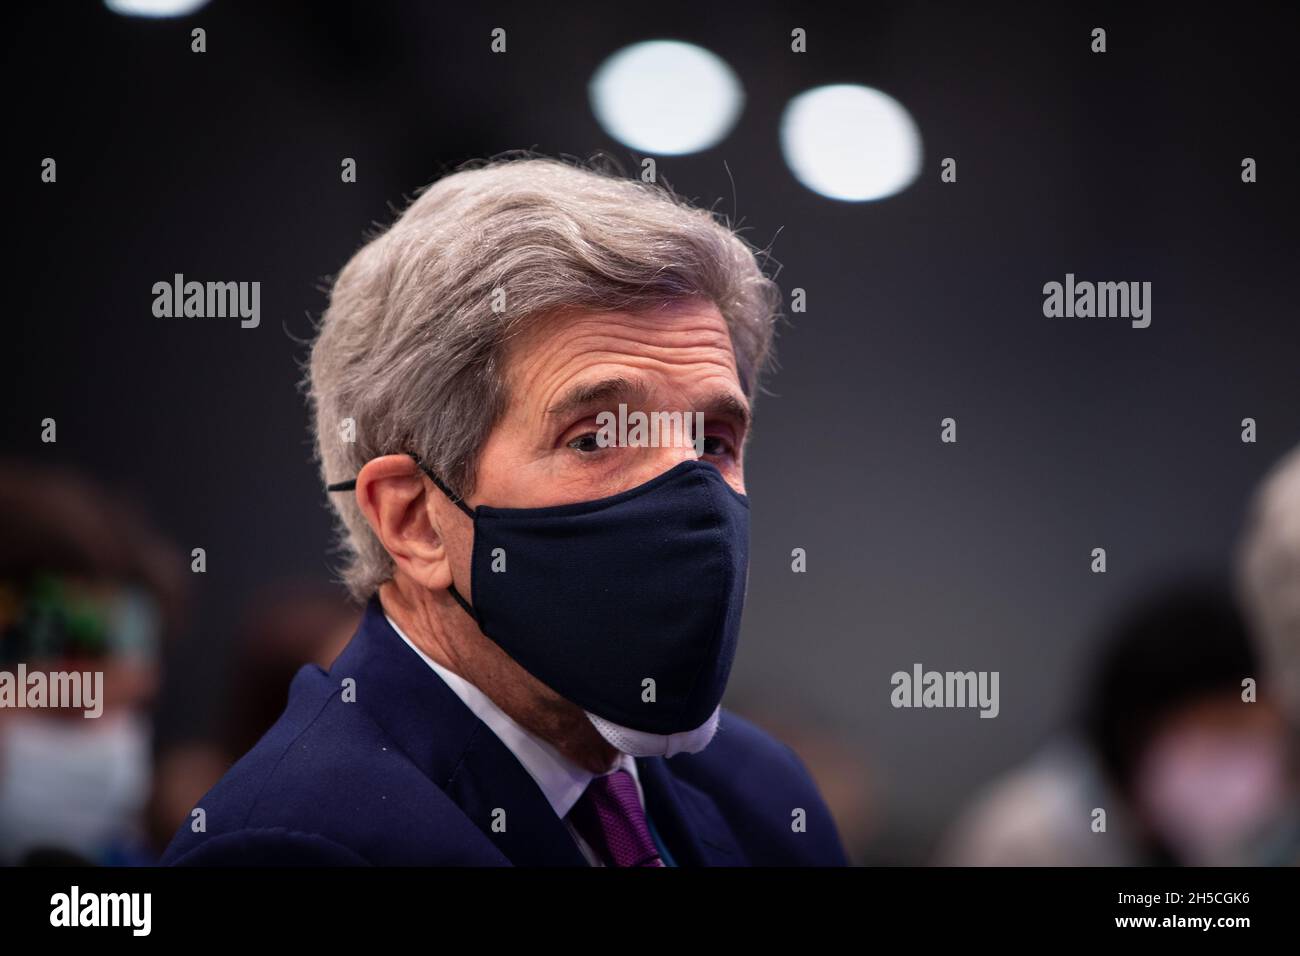 Glasgow, Scotland, UK. USA Special Envoy John Kerry listens as Barack Obama, former President of the United States of America, speaks at the 26th United Nations Climate Change Conference, known as COP26, in Glasgow, Scotland, UK, on 8 November 2021. Photo:Jeremy Sutton-Hibbert/Alamy Live News. Stock Photo